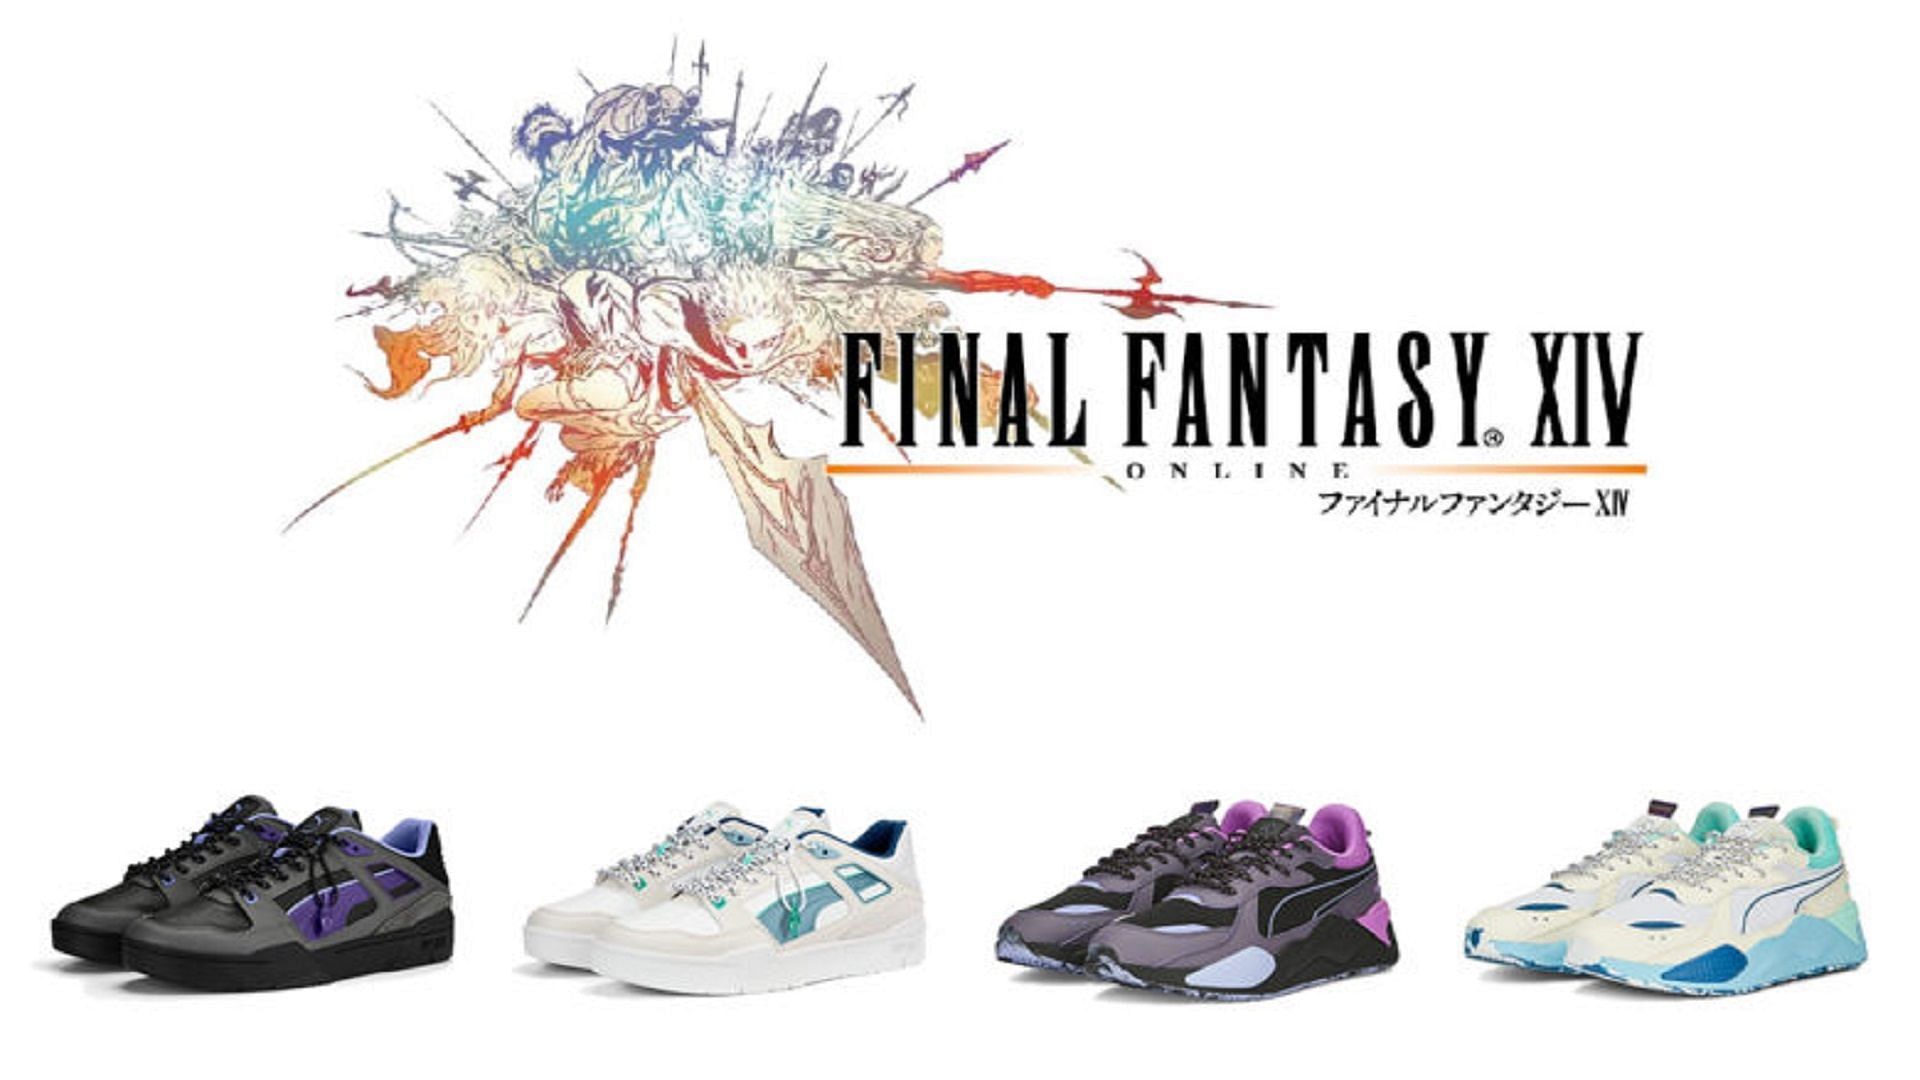 Puma x Final Fantasy XIV collection: Price, release date, and more